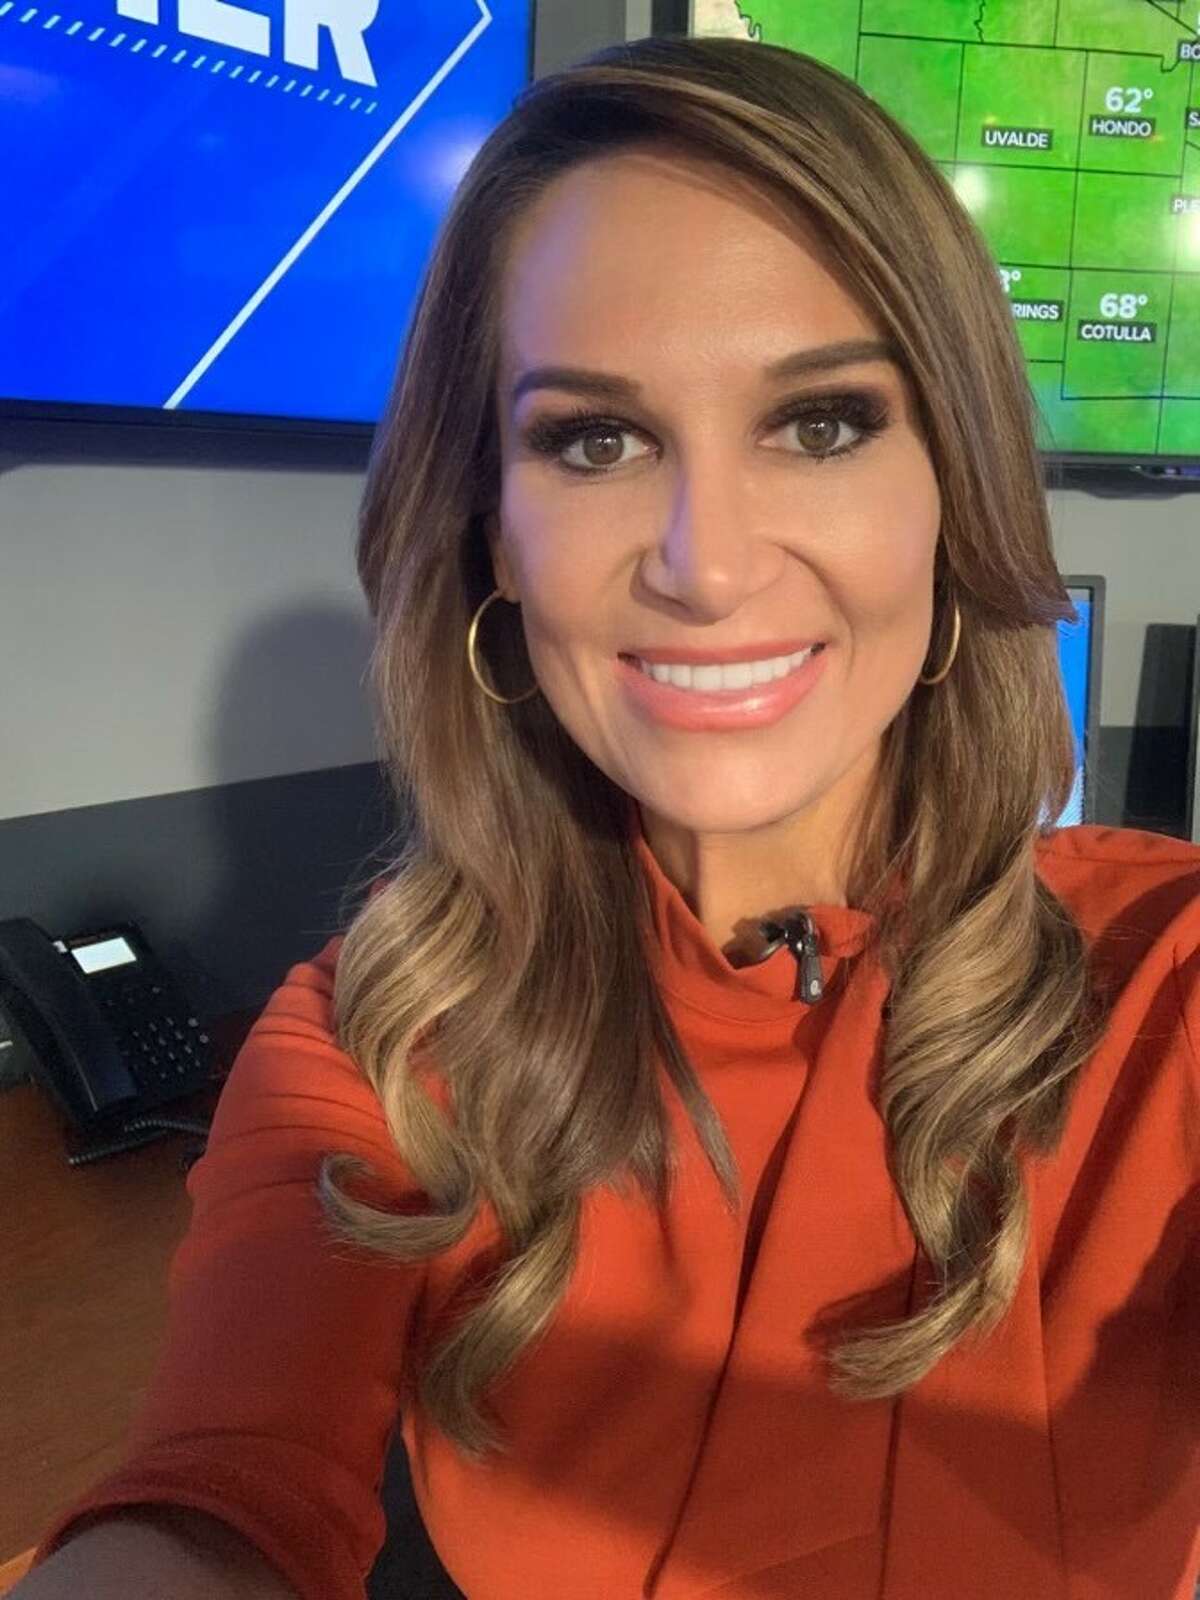 KENS 5 meteorologist Stacia Willson is set to leave the station next month.